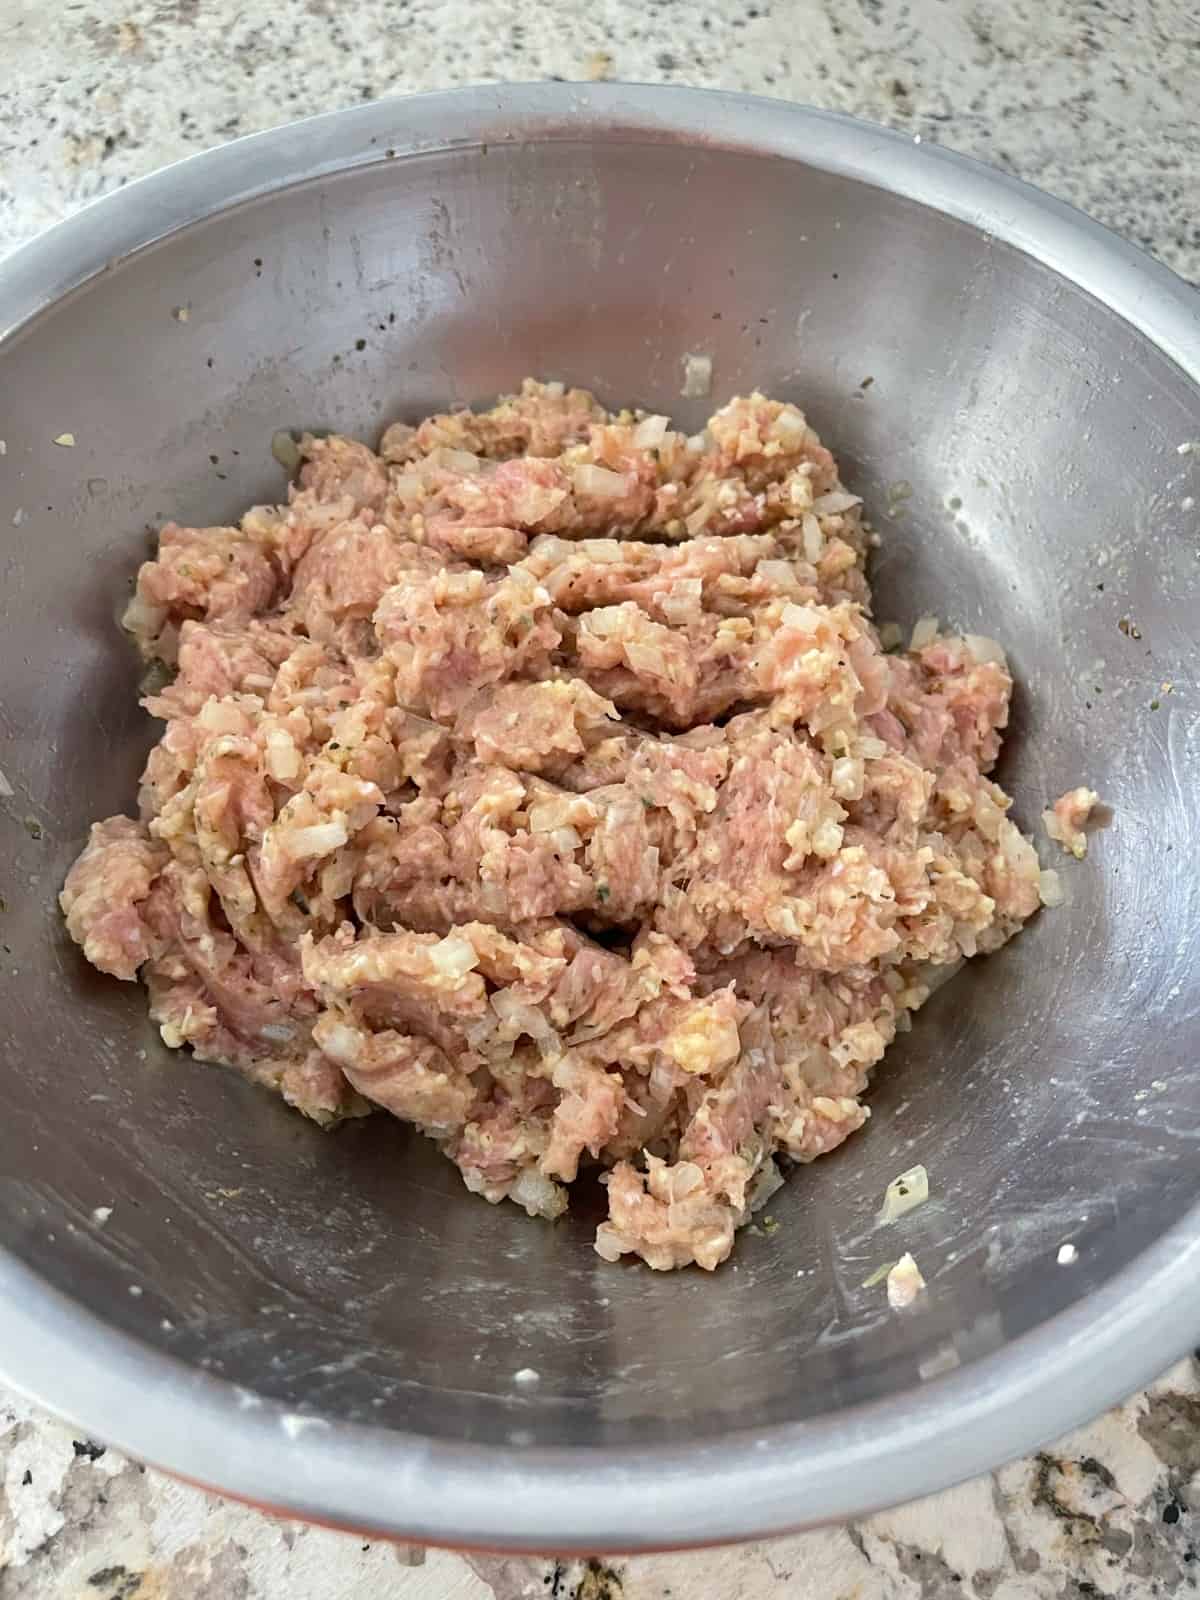 Combining ingredients in mixing bowl for making turkey meatballs.